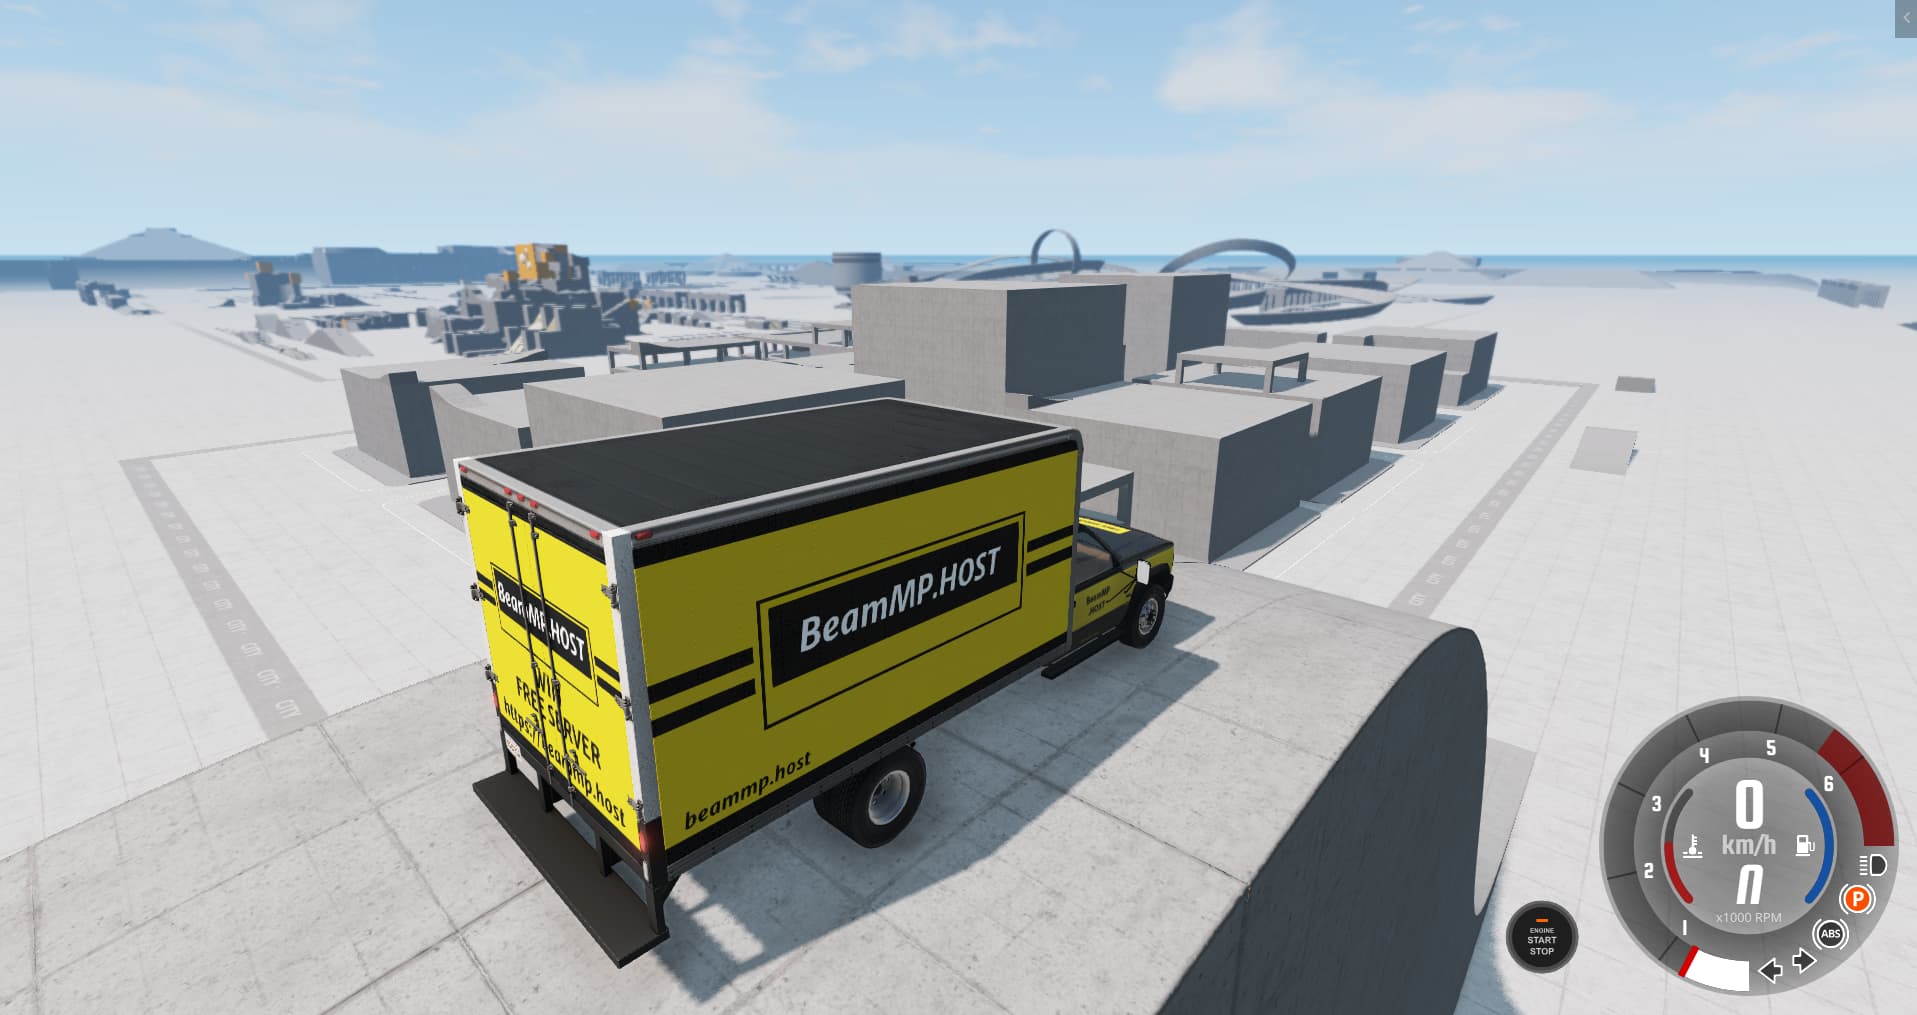 2021 07 06 11 39 00 BeamNG.drive   0.23.1.0.12365   RELEASE   X64   Background 1  